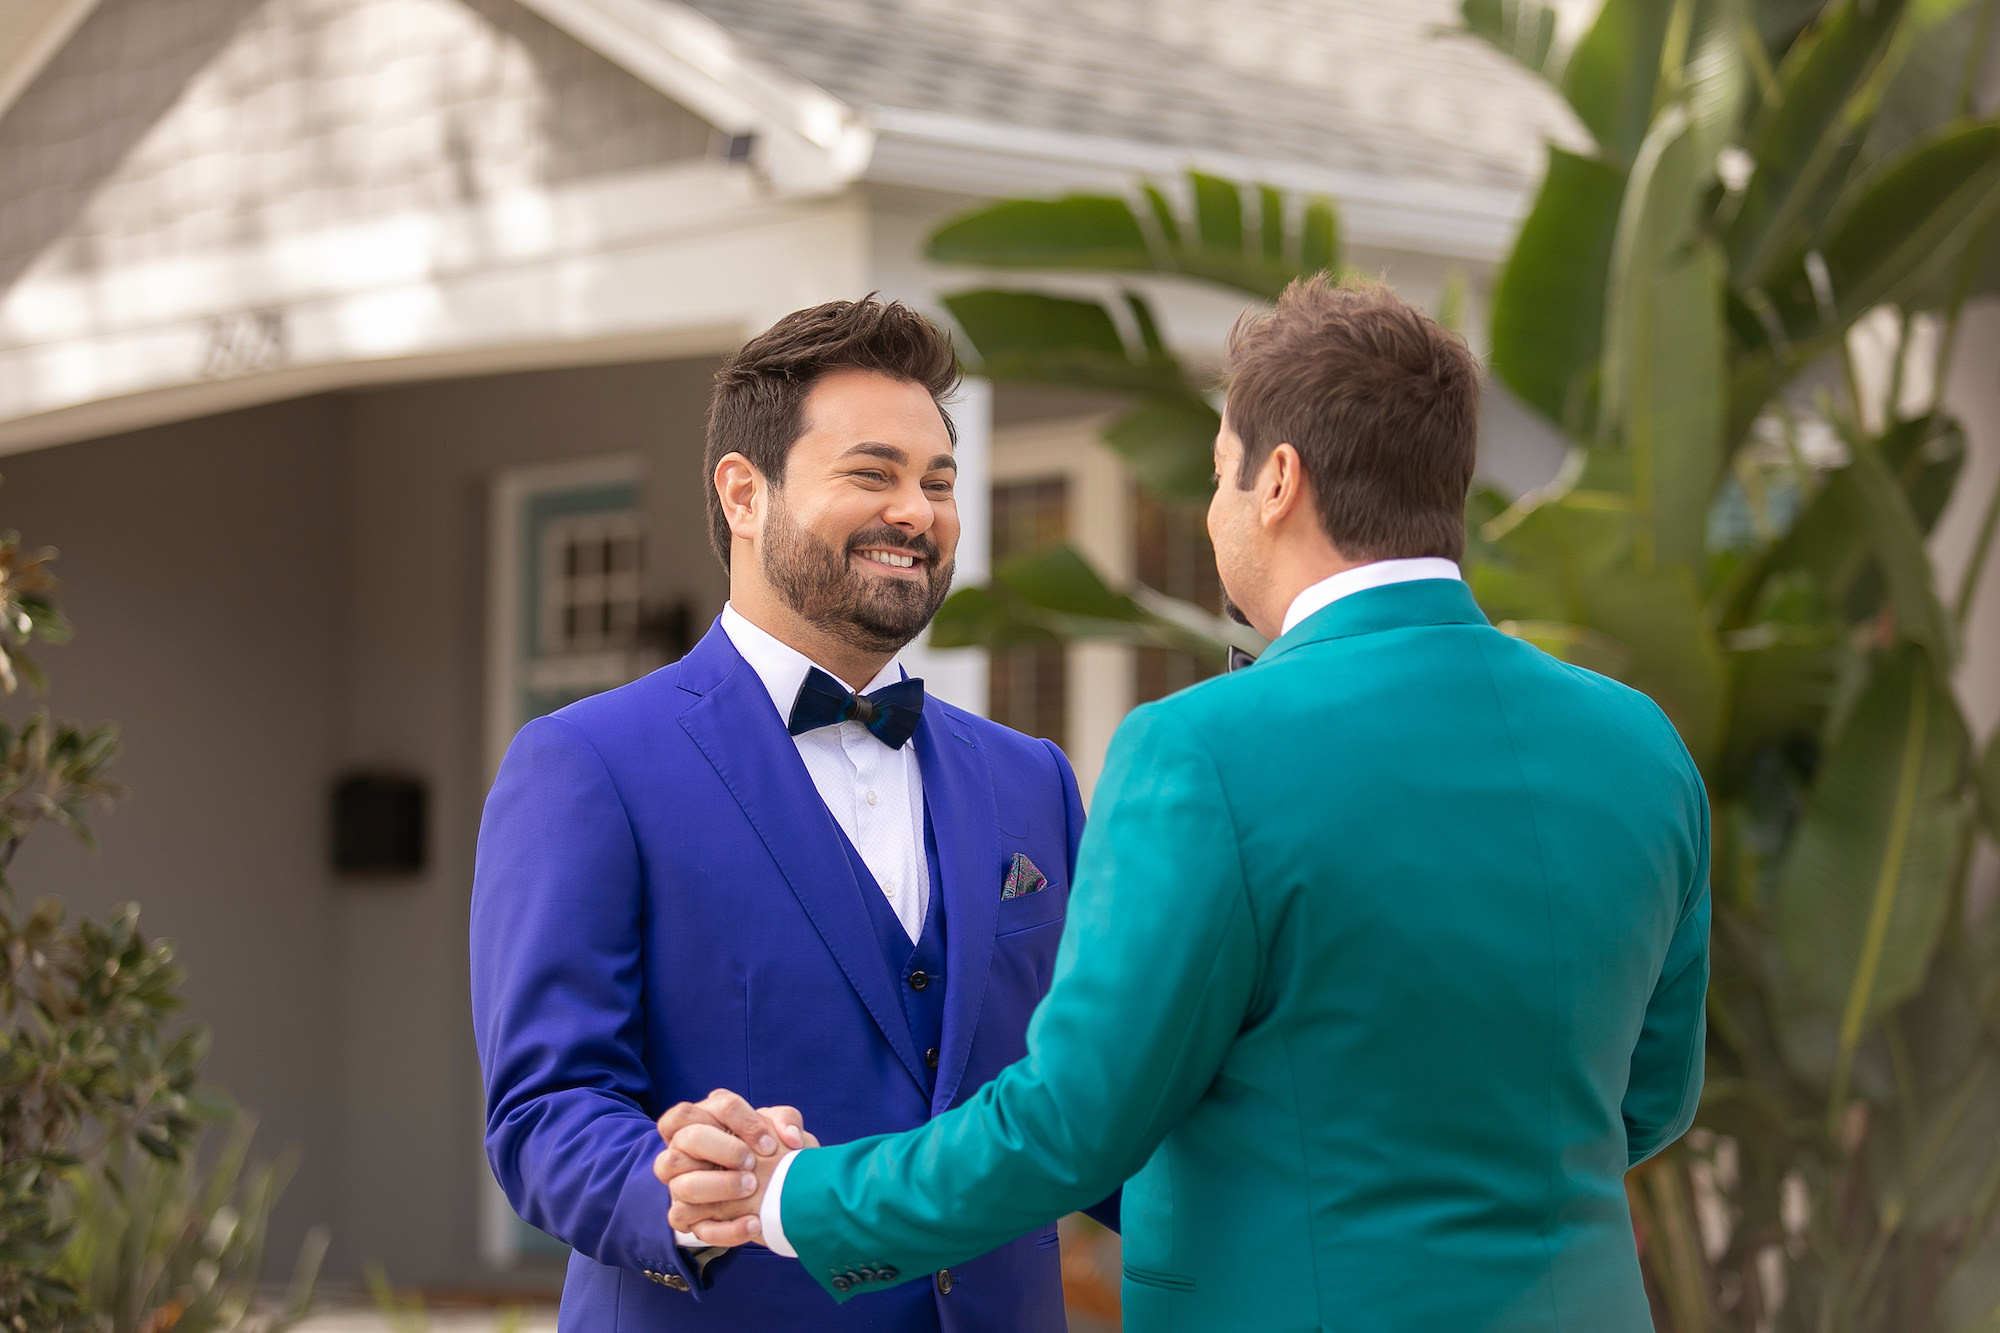 Jewel Toned Groom Suits First Look Wedding Portrait in Tropical Downtown St Pete Wedding | Florida Wedding Photographer Kristen Marie Photography